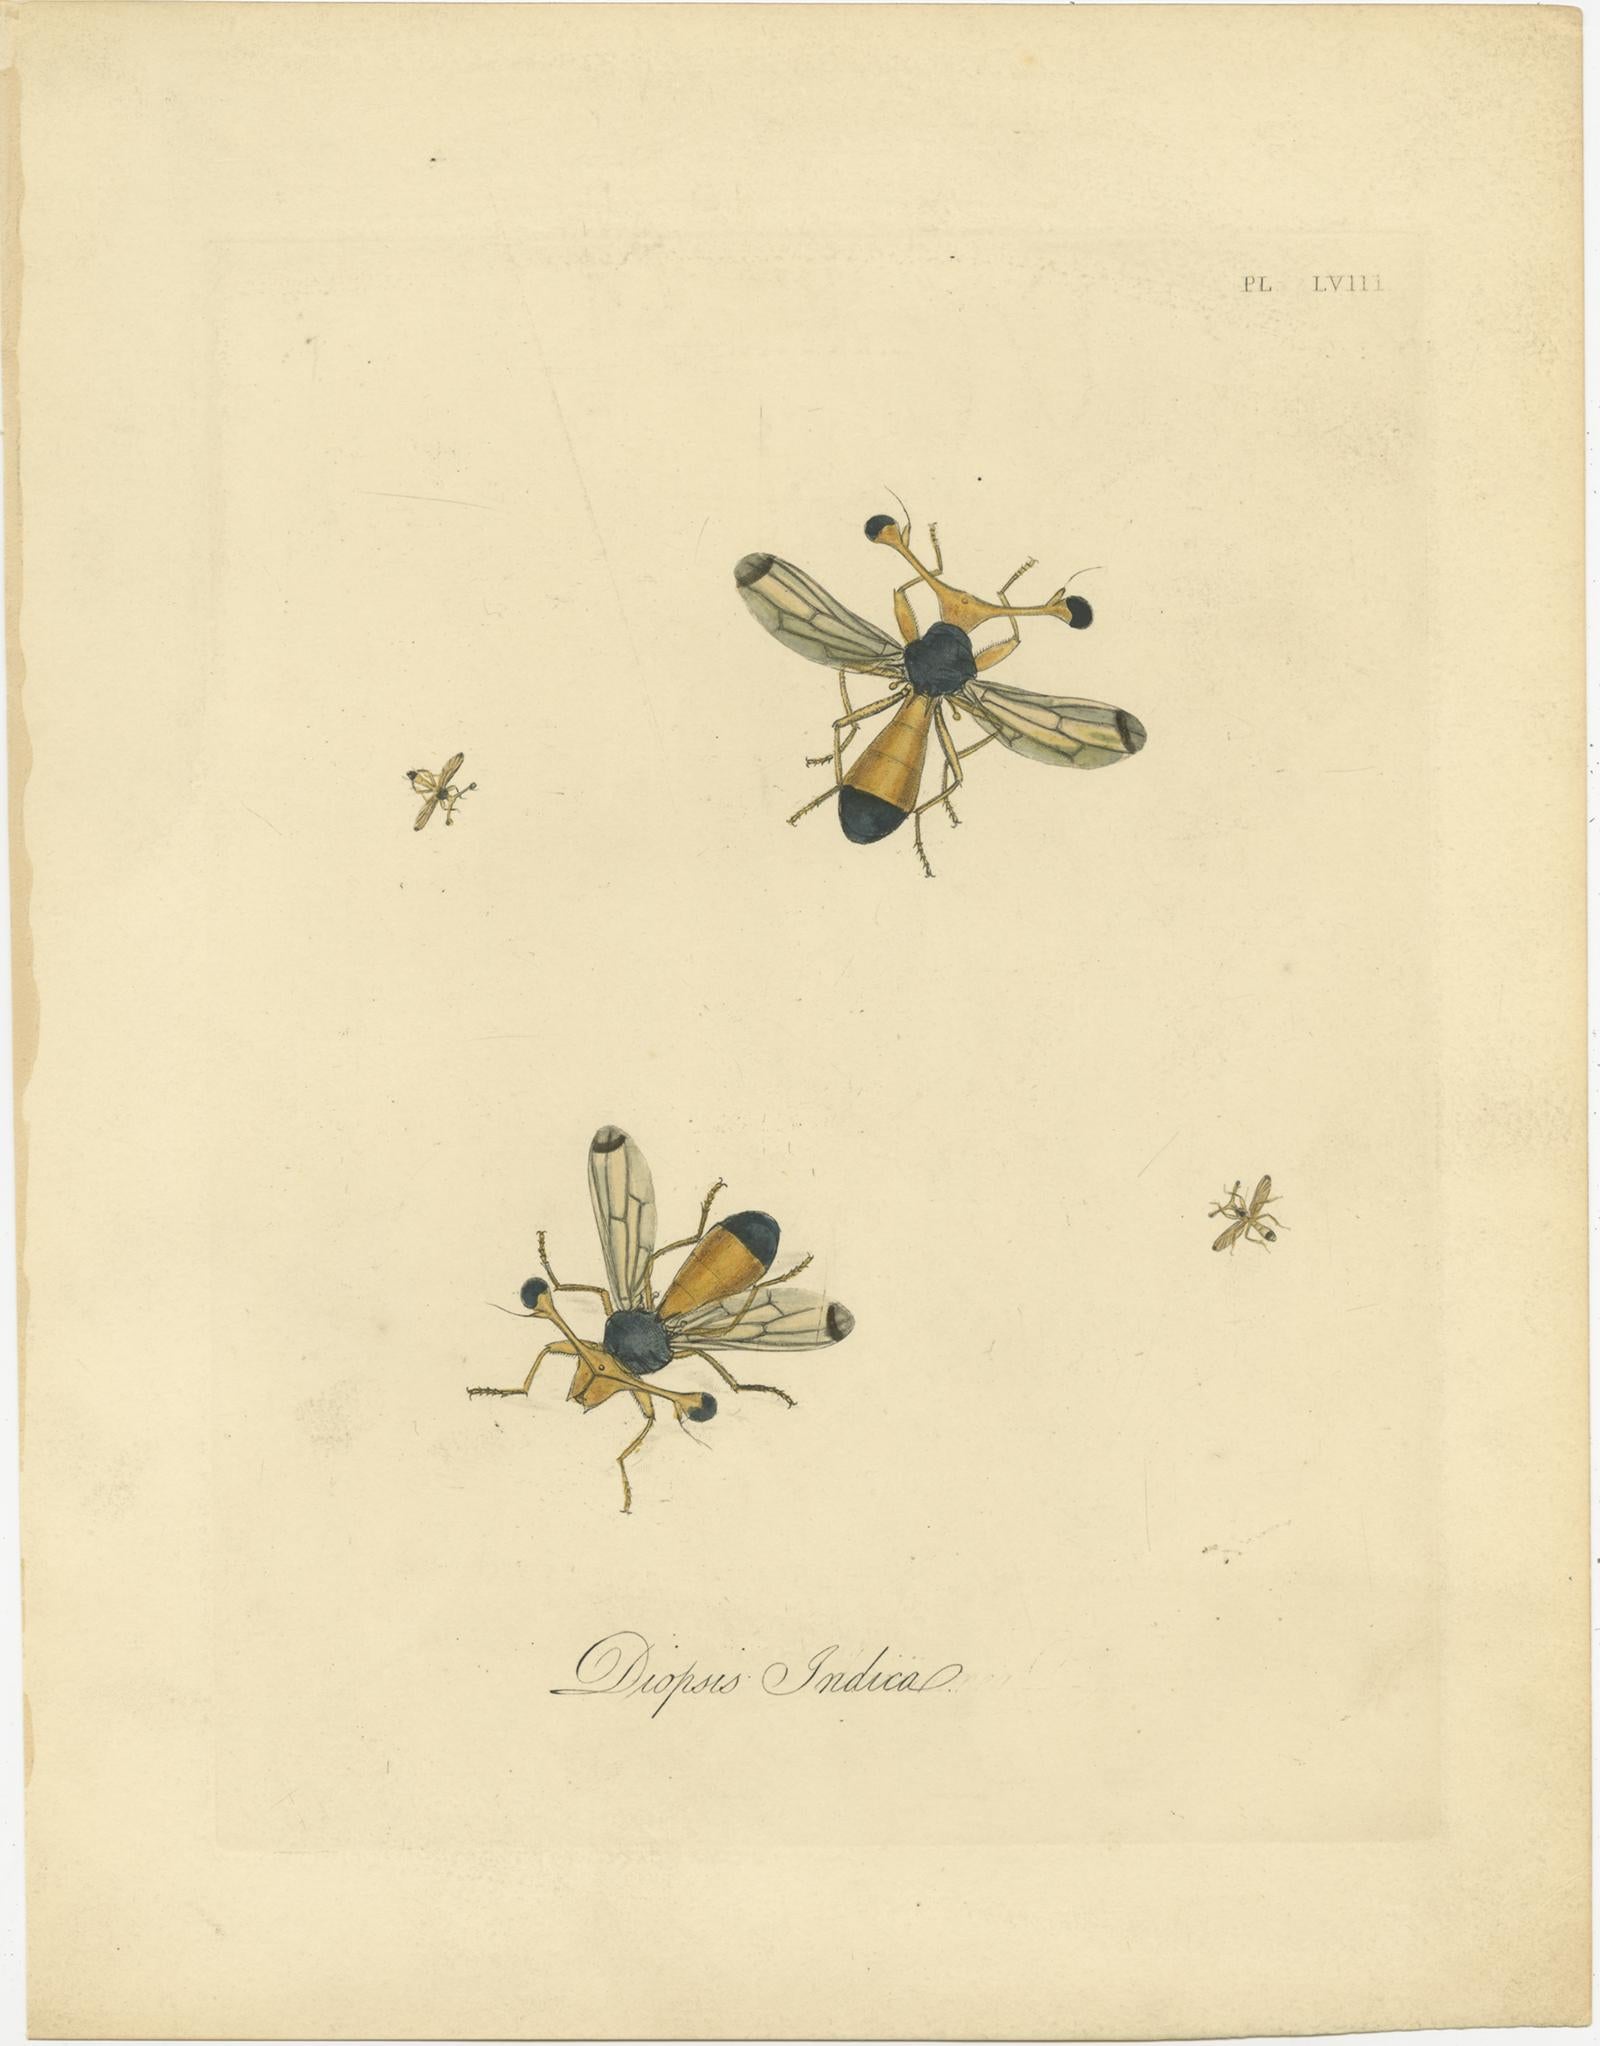 Set of four antique entomology prints depicting various insects including the diptera, anthia beetle, butterflies and other insects. These prints originate from 'Natural History of the Insects of India' by E. Donovan, 1842.